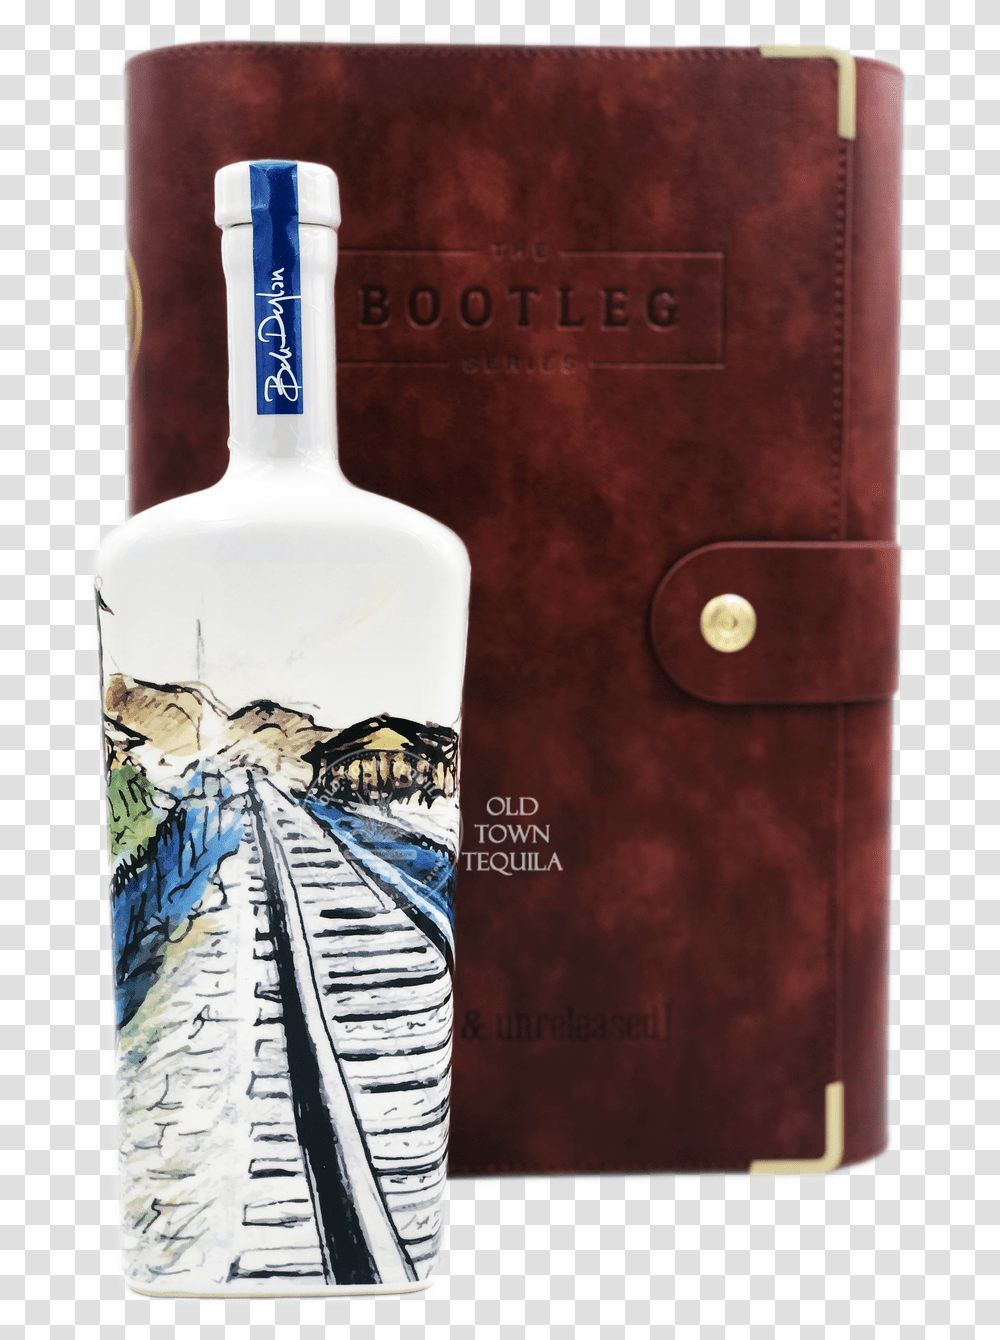 Heaven S Door The Bootleg Series 2019 Edition Whiskey, Liquor, Alcohol, Beverage, Drink Transparent Png